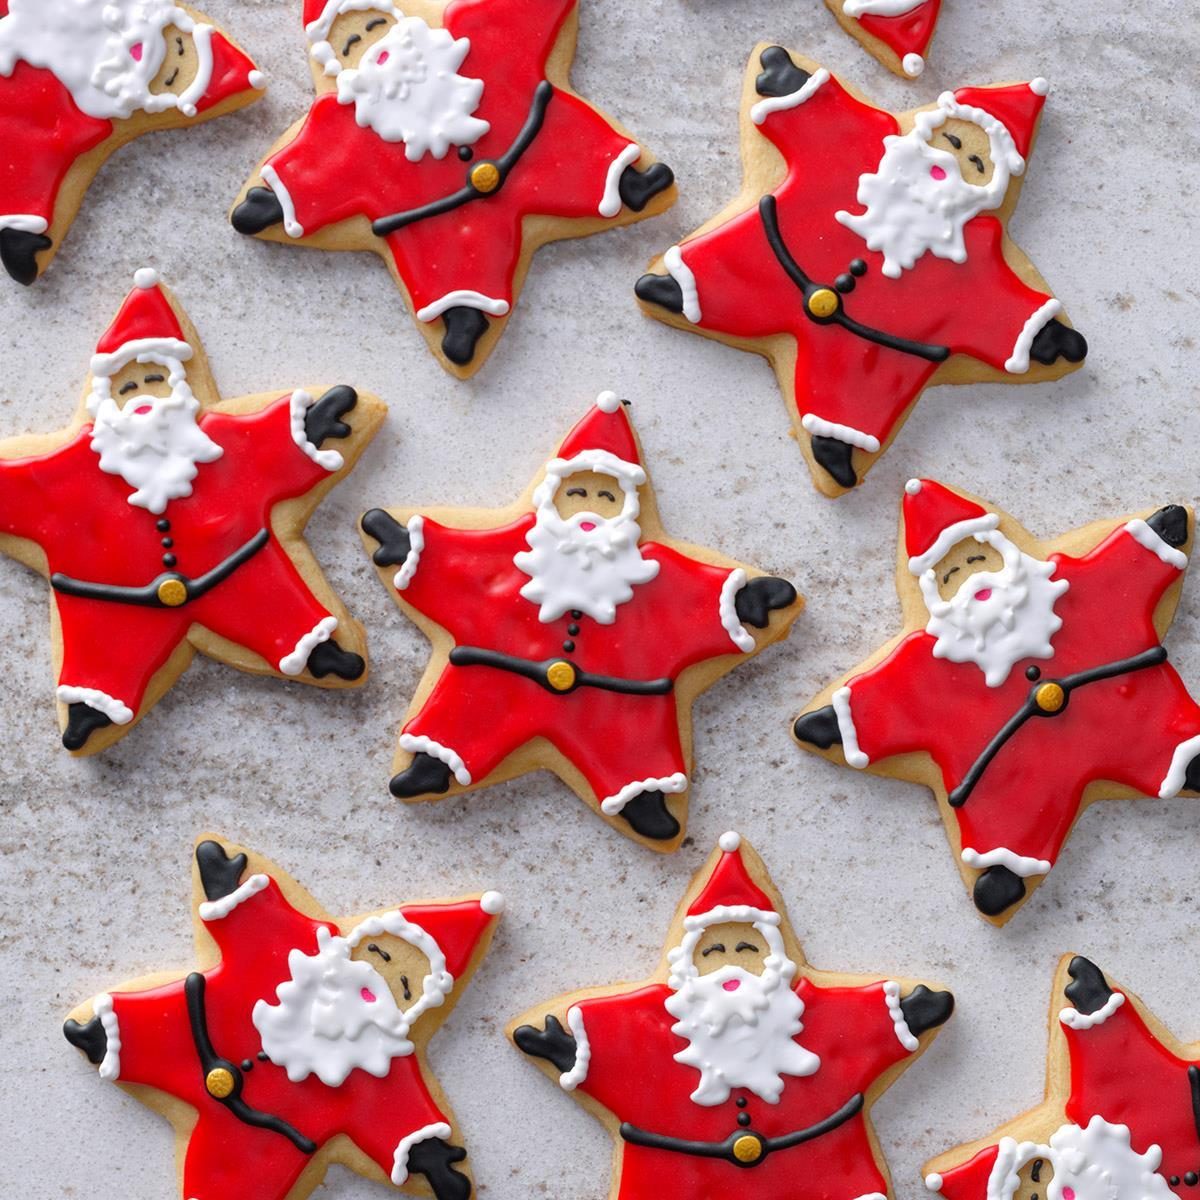 The Perfect Cookies for Santa Starts with the Right Baking Supplies…